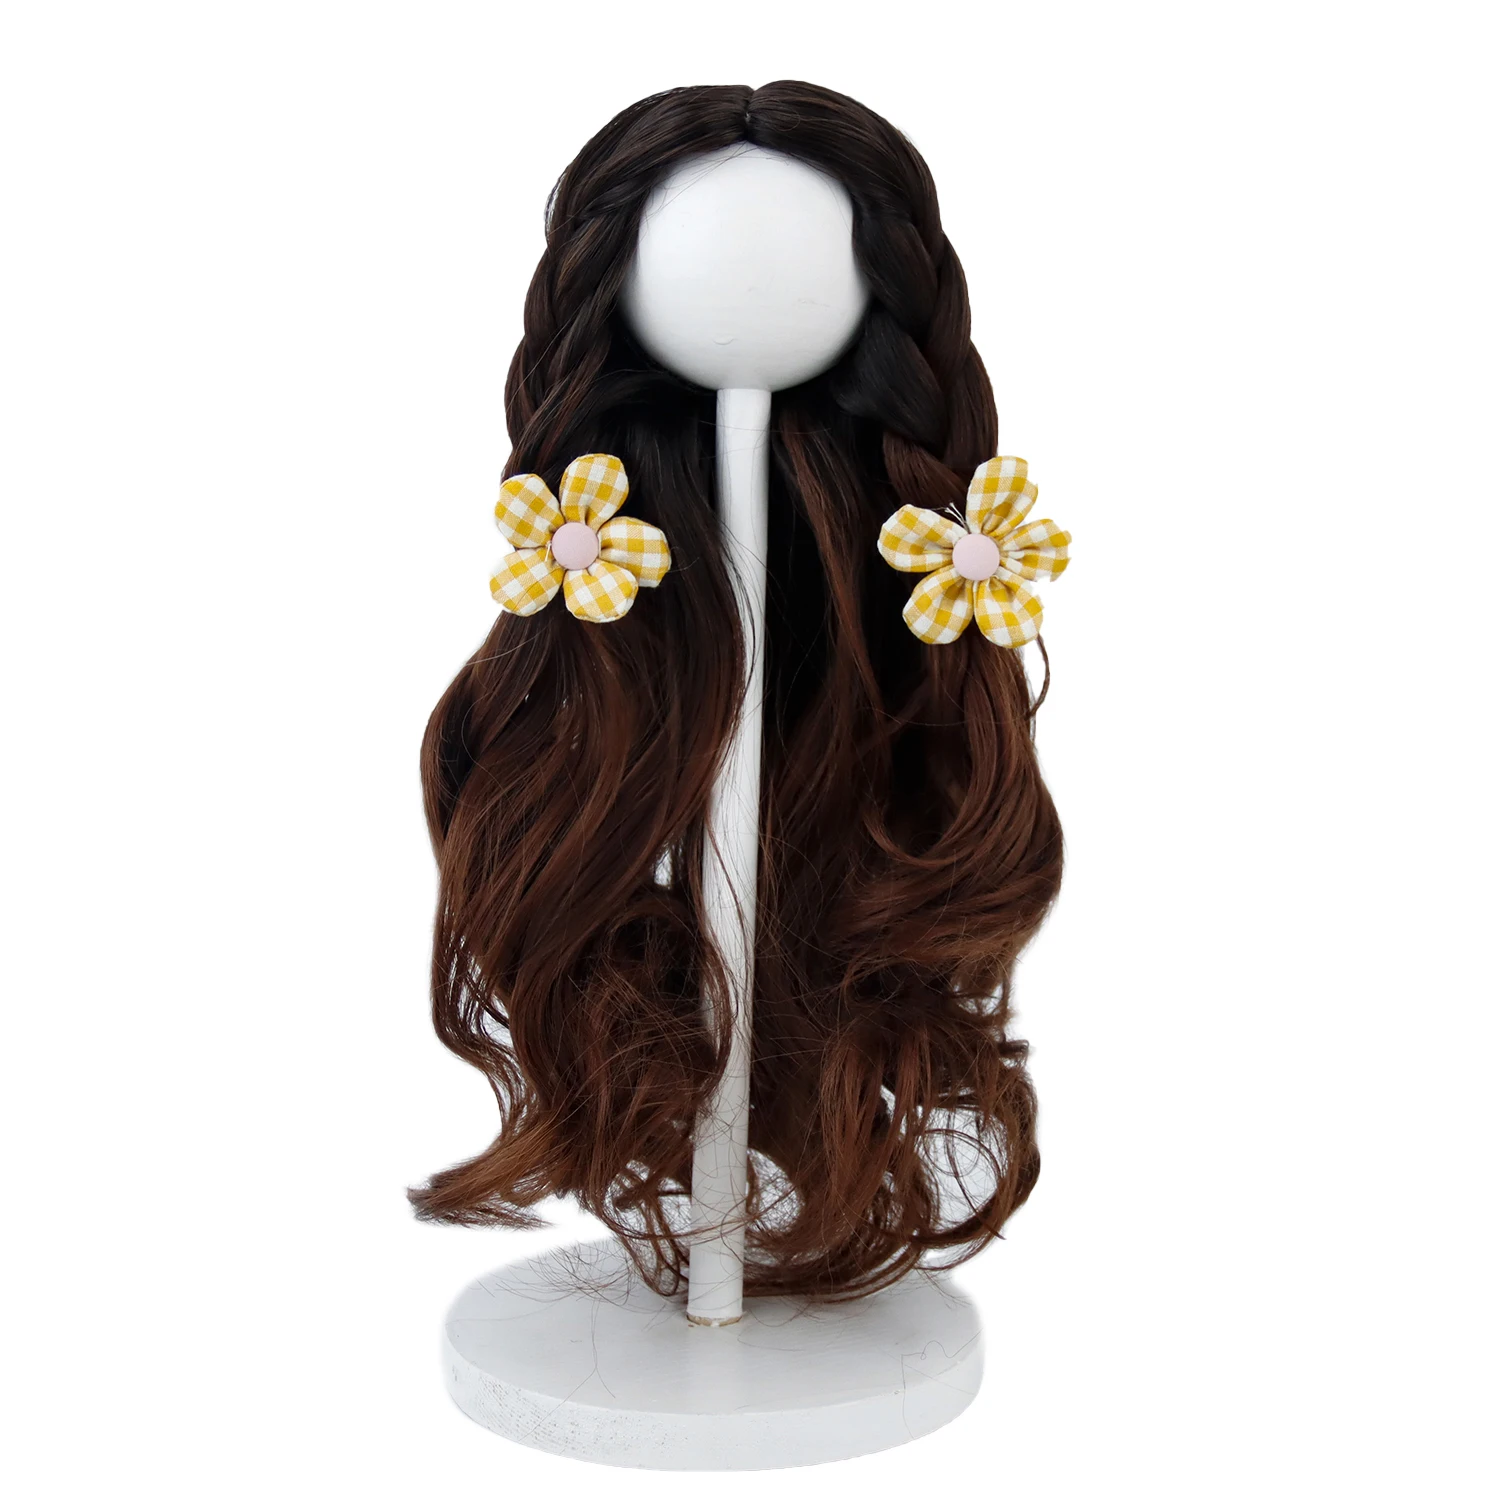 

Aidolla Doll Wigs Long Curly Red Brown Synthetic Hair For 18'' American Doll DIY Doll Making